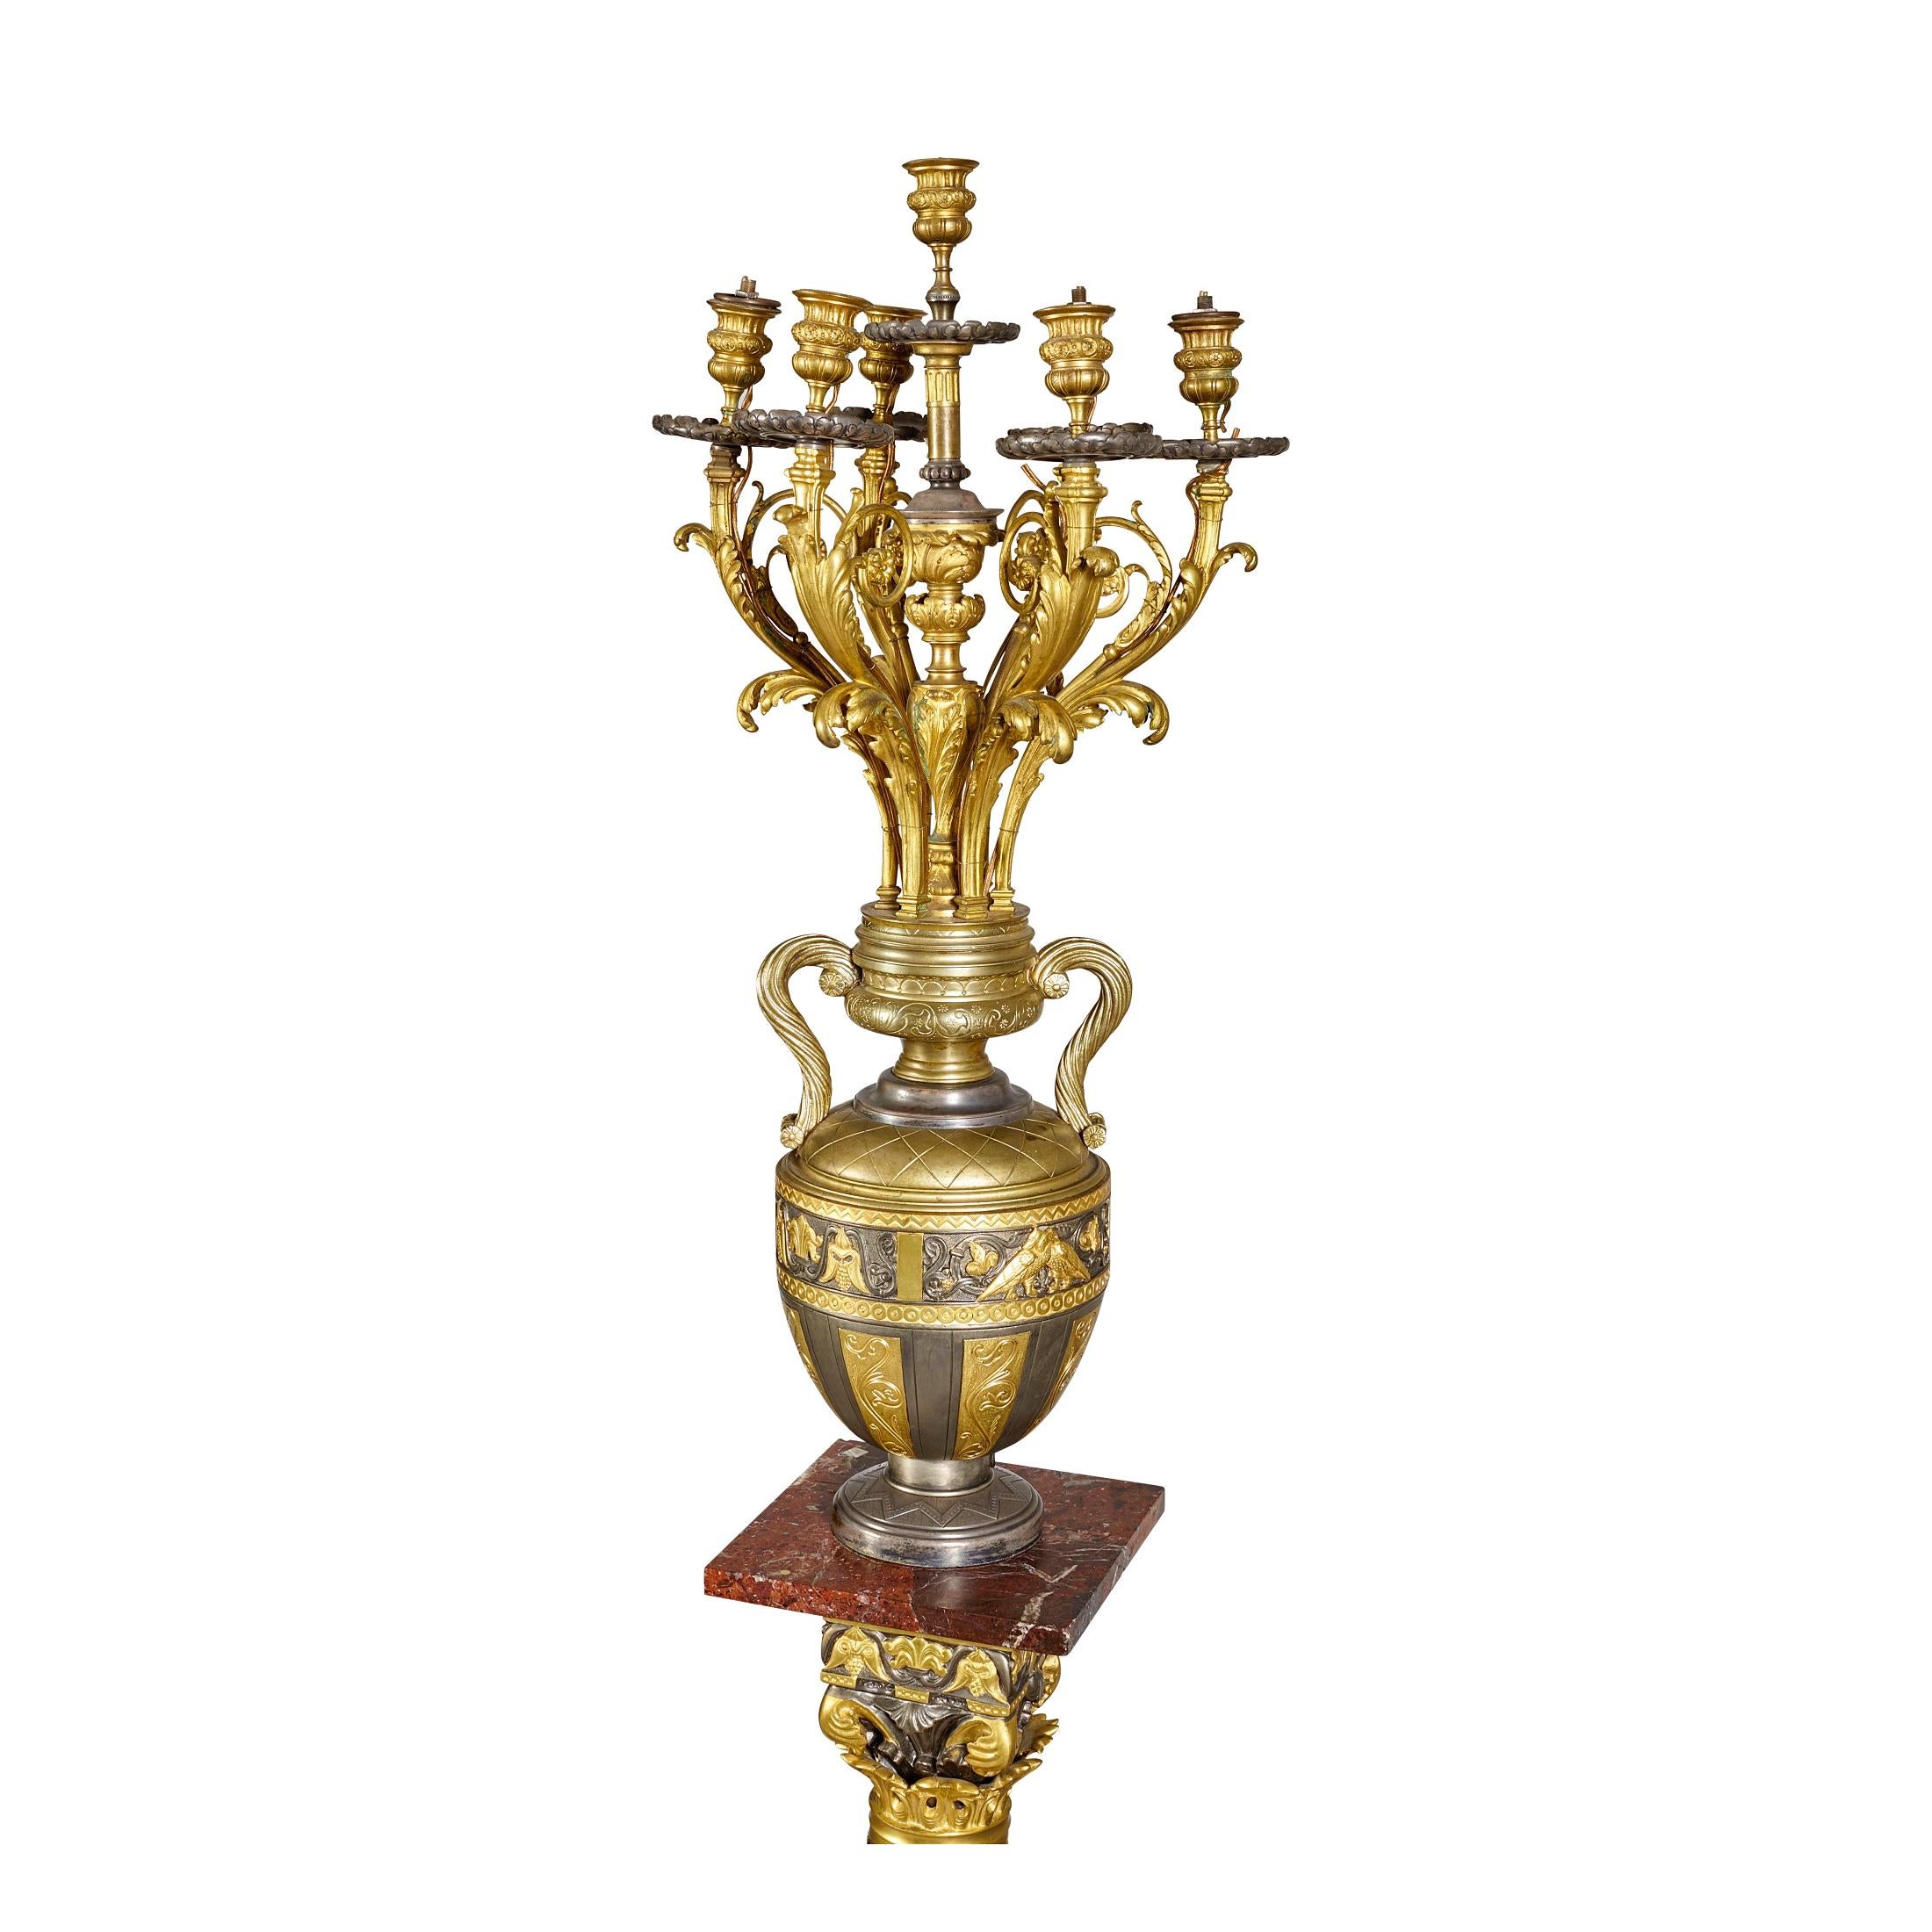 Highly important exhibition pair of 19th century large French gilt and silvered bronze candelabra on pedestal. The pair of candelabras on gorgeous Levanto rouge marble bases and formerly owned by MGM Studios.

Maker: Auguste Lacarrière Père, Fils et